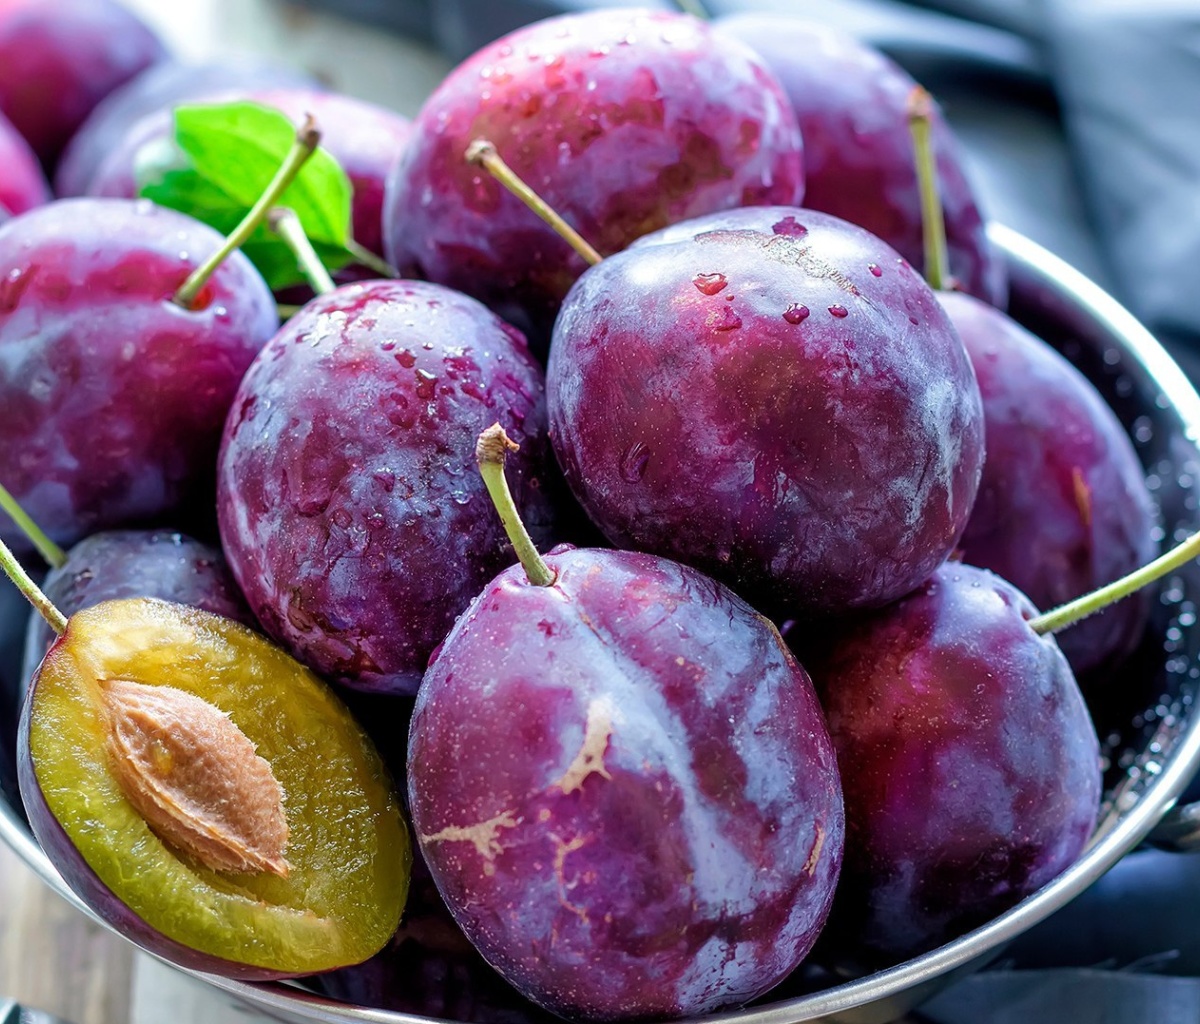 Das Plums with Vitamins Wallpaper 1200x1024